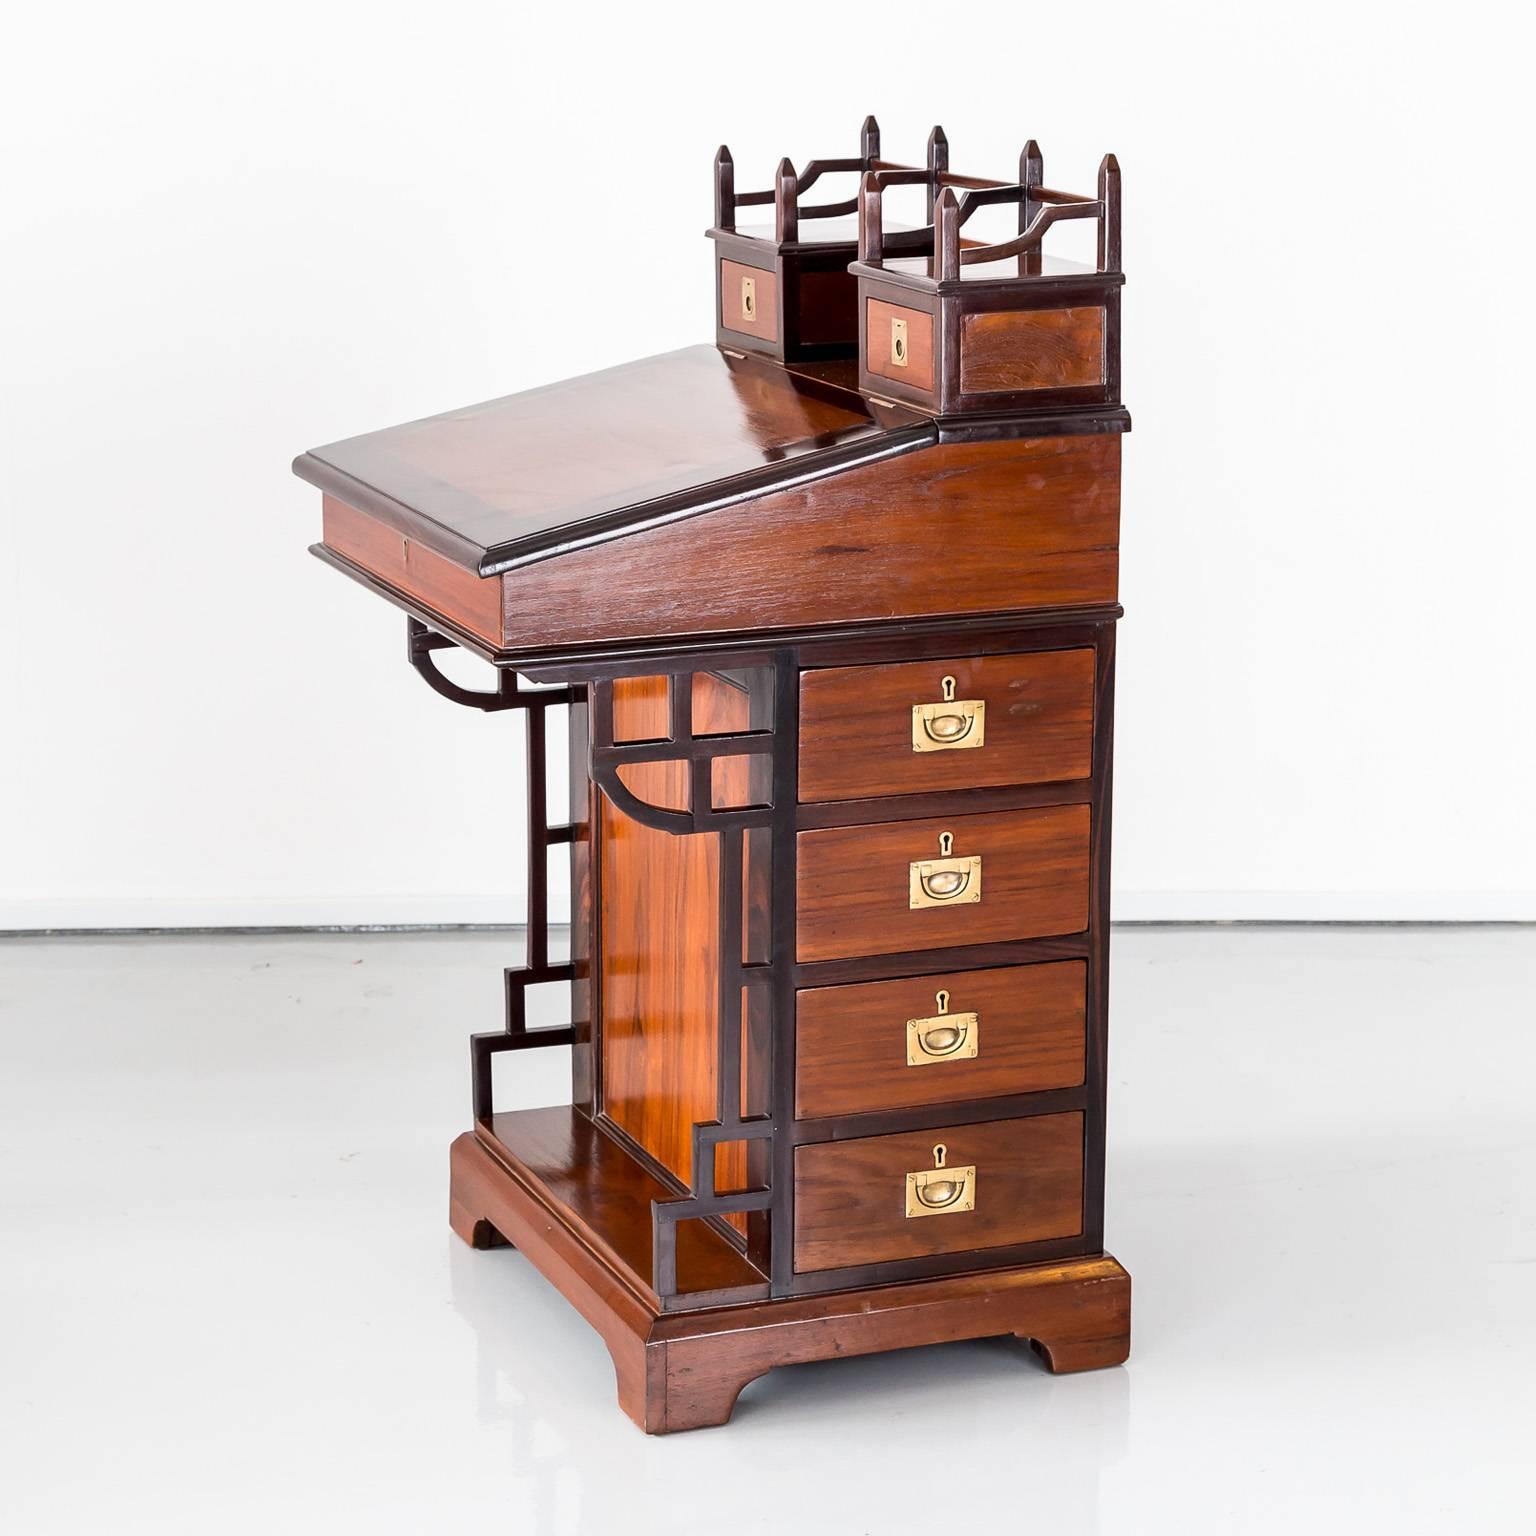 A British Colonial Davenport desk in teak wood with nice contrasting details. It has the original wooden gallery above a writing slope that opens to reveal storage space. 
On the rectangular top a gallery with two small drawers with brass ring